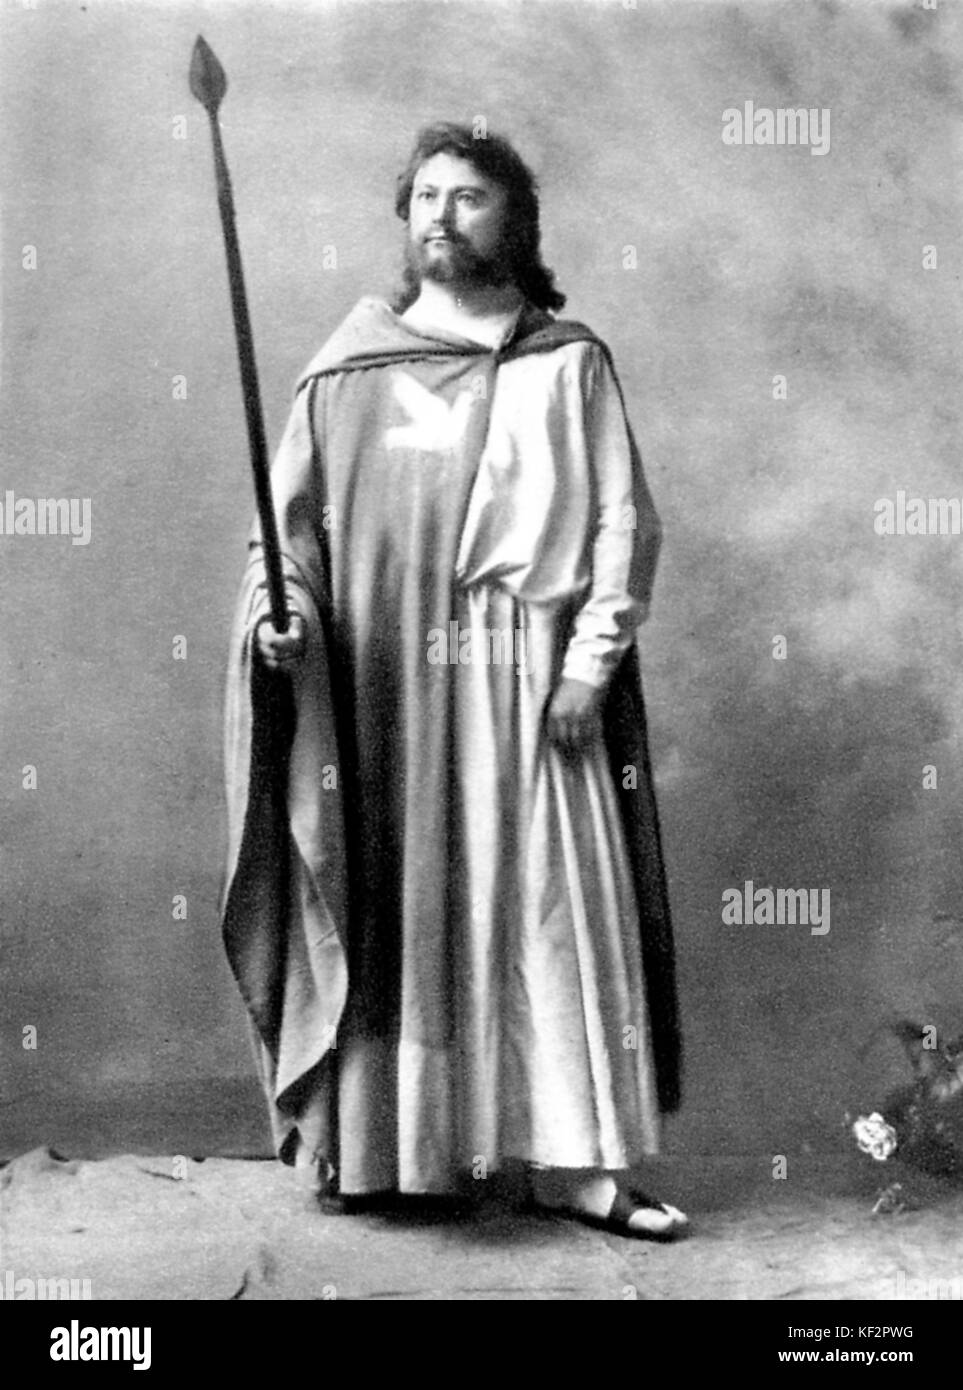 'Parsifal' opera by Richard Wagner. Shows  Hermann Winkelmann as Parsifal. Tenor, b. 1849- 1912. Premiered Bayreuth, Germany 26 July 1882. RW German composer & author, 22 May 1813 - 13 February 1883. Stock Photo